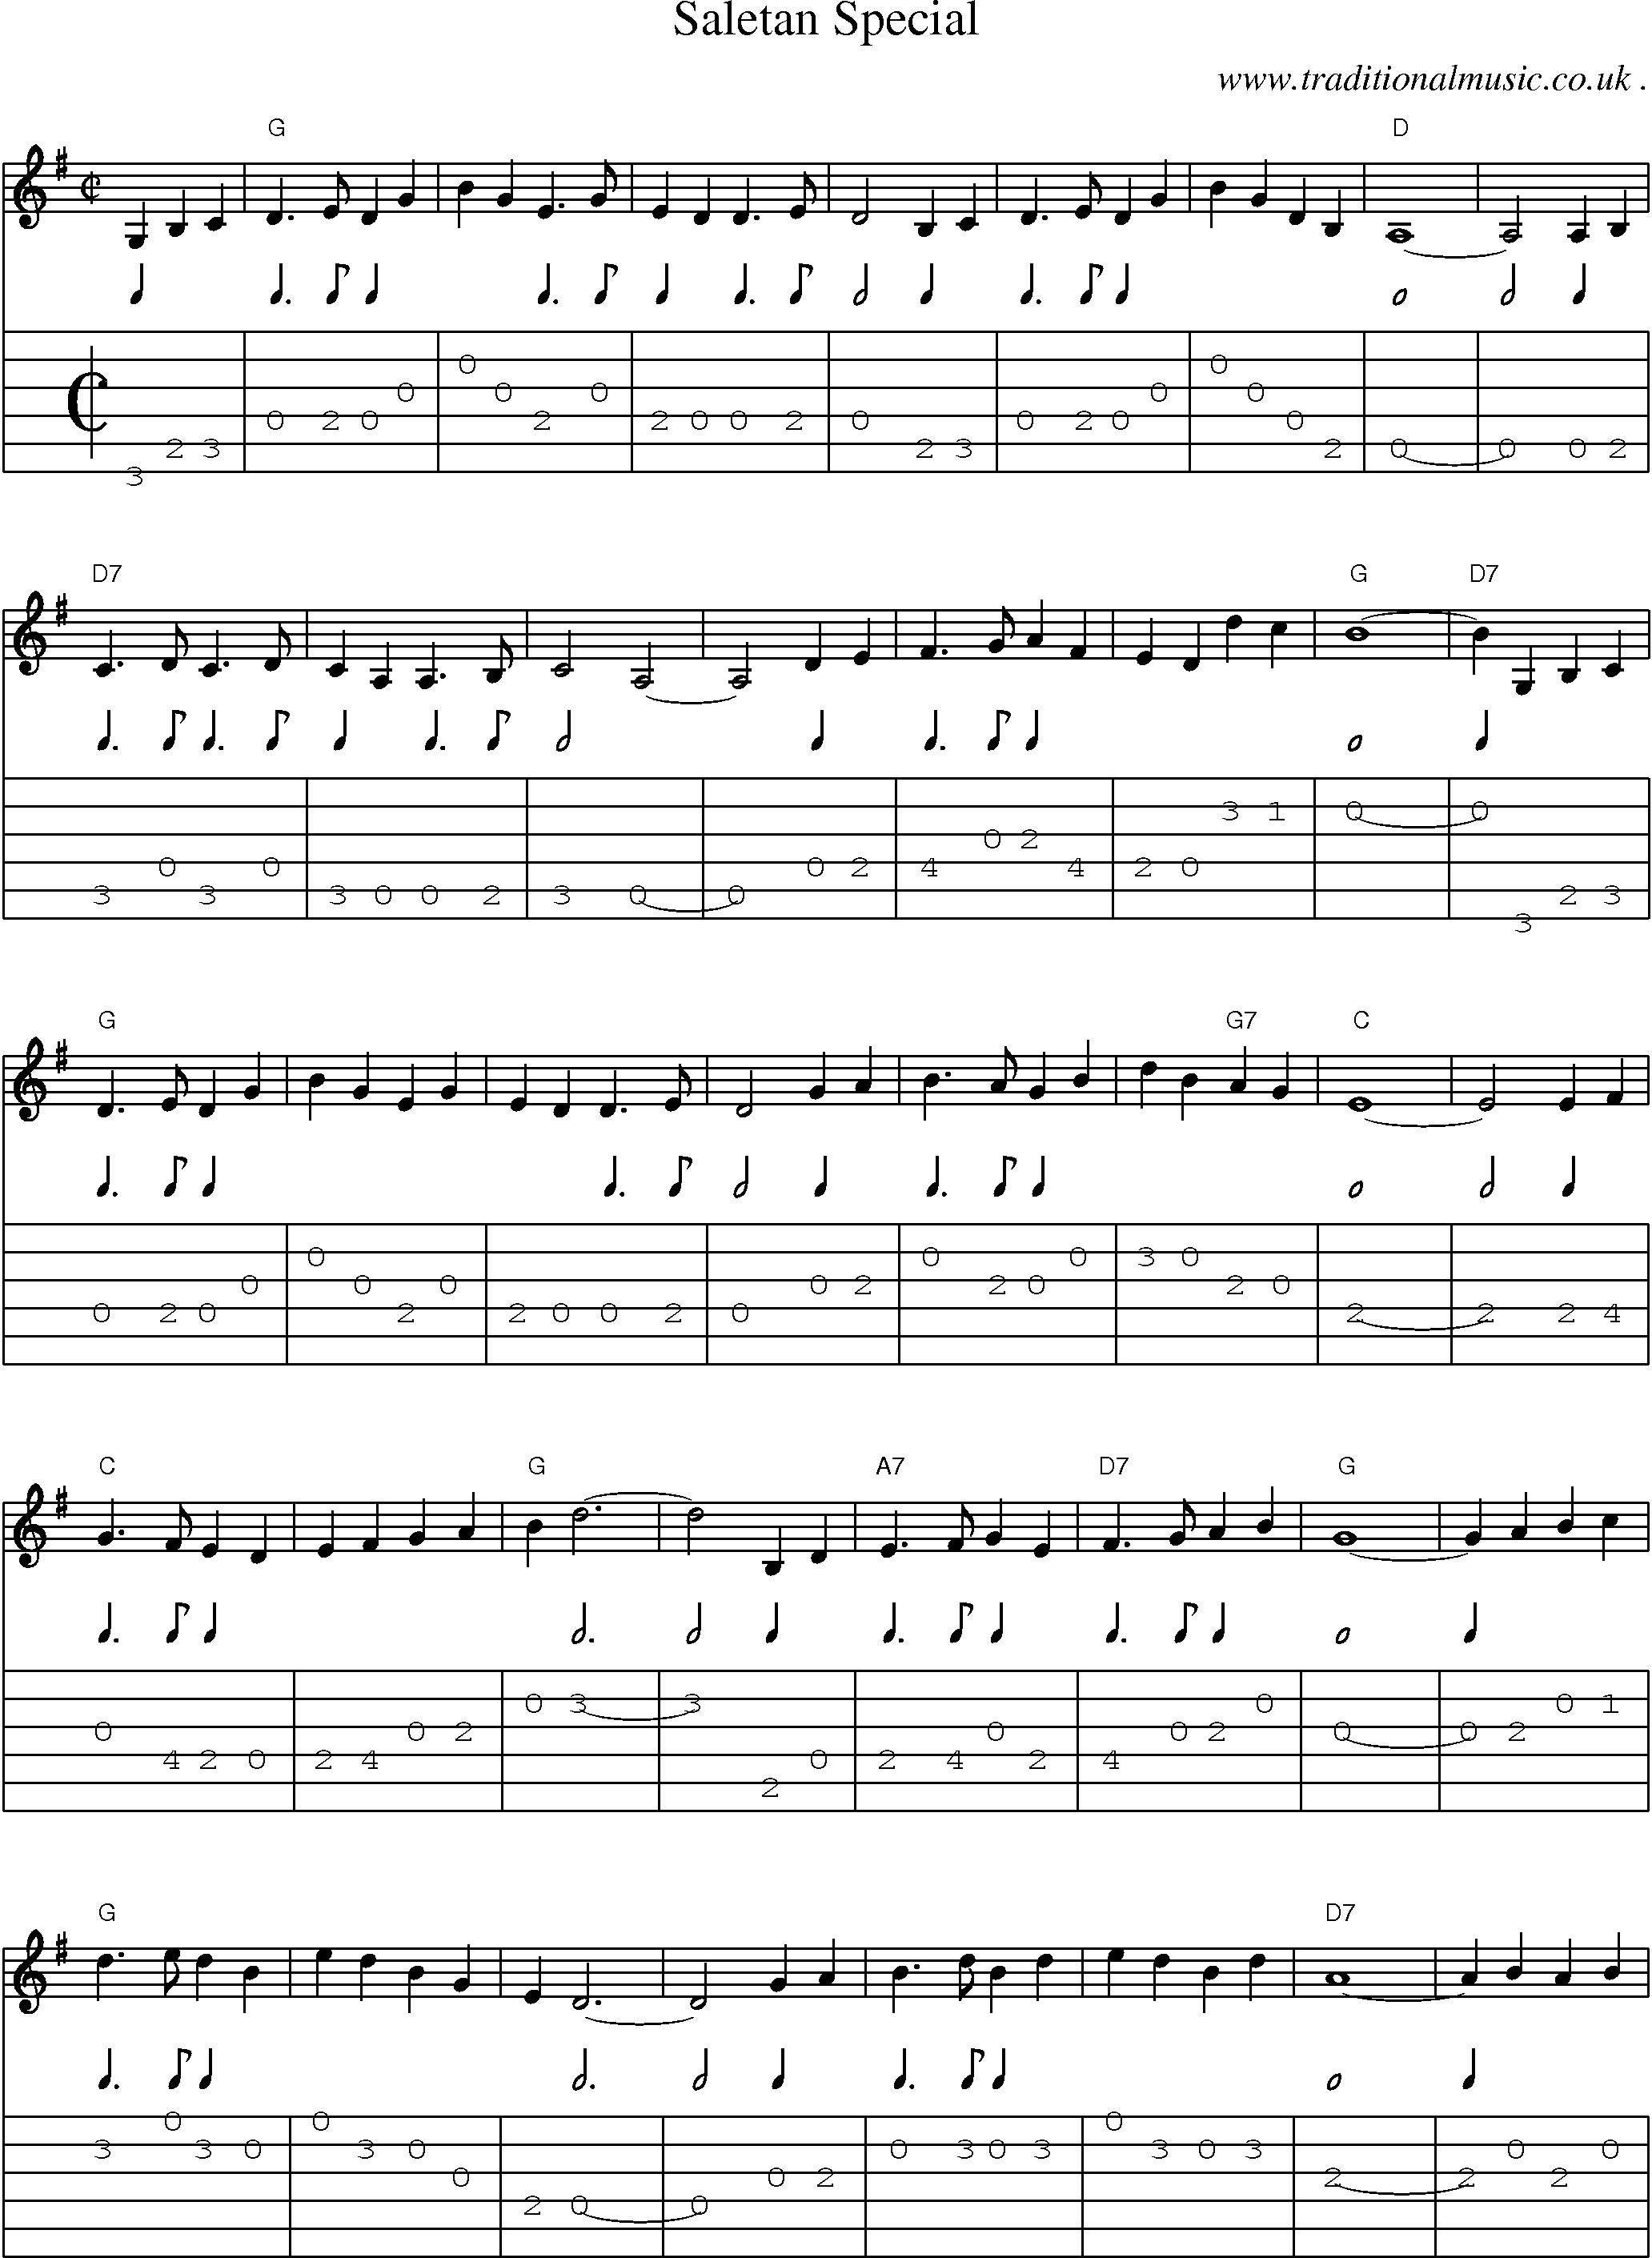 Music Score and Guitar Tabs for Saletan Special